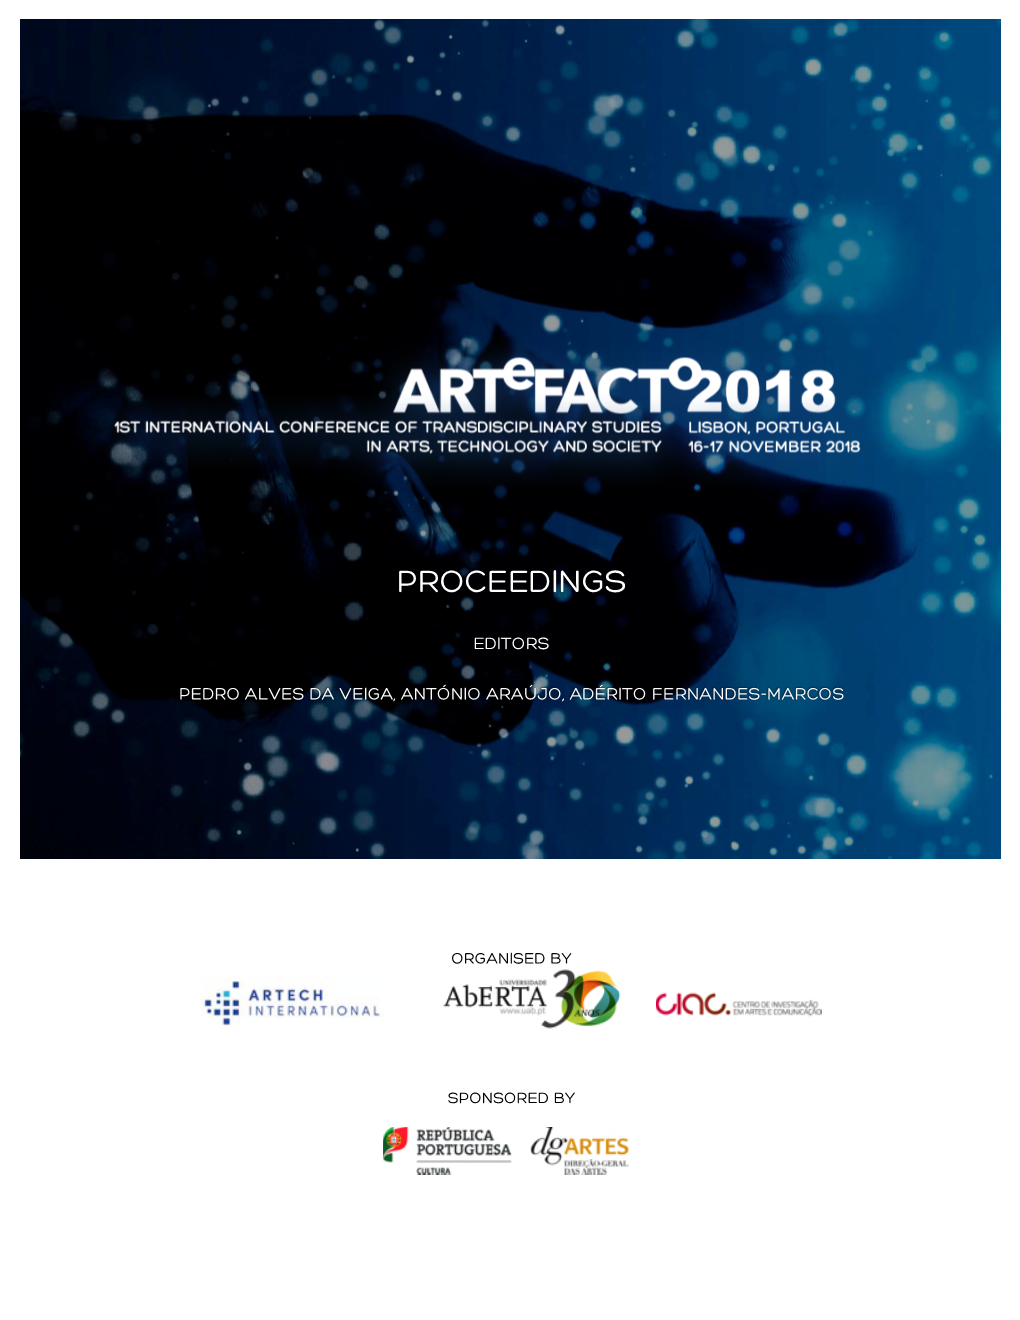 Proceedings of 1St International Conference on Transdisciplinary Studies in Arts, Technology and Society, Artefacto 2018